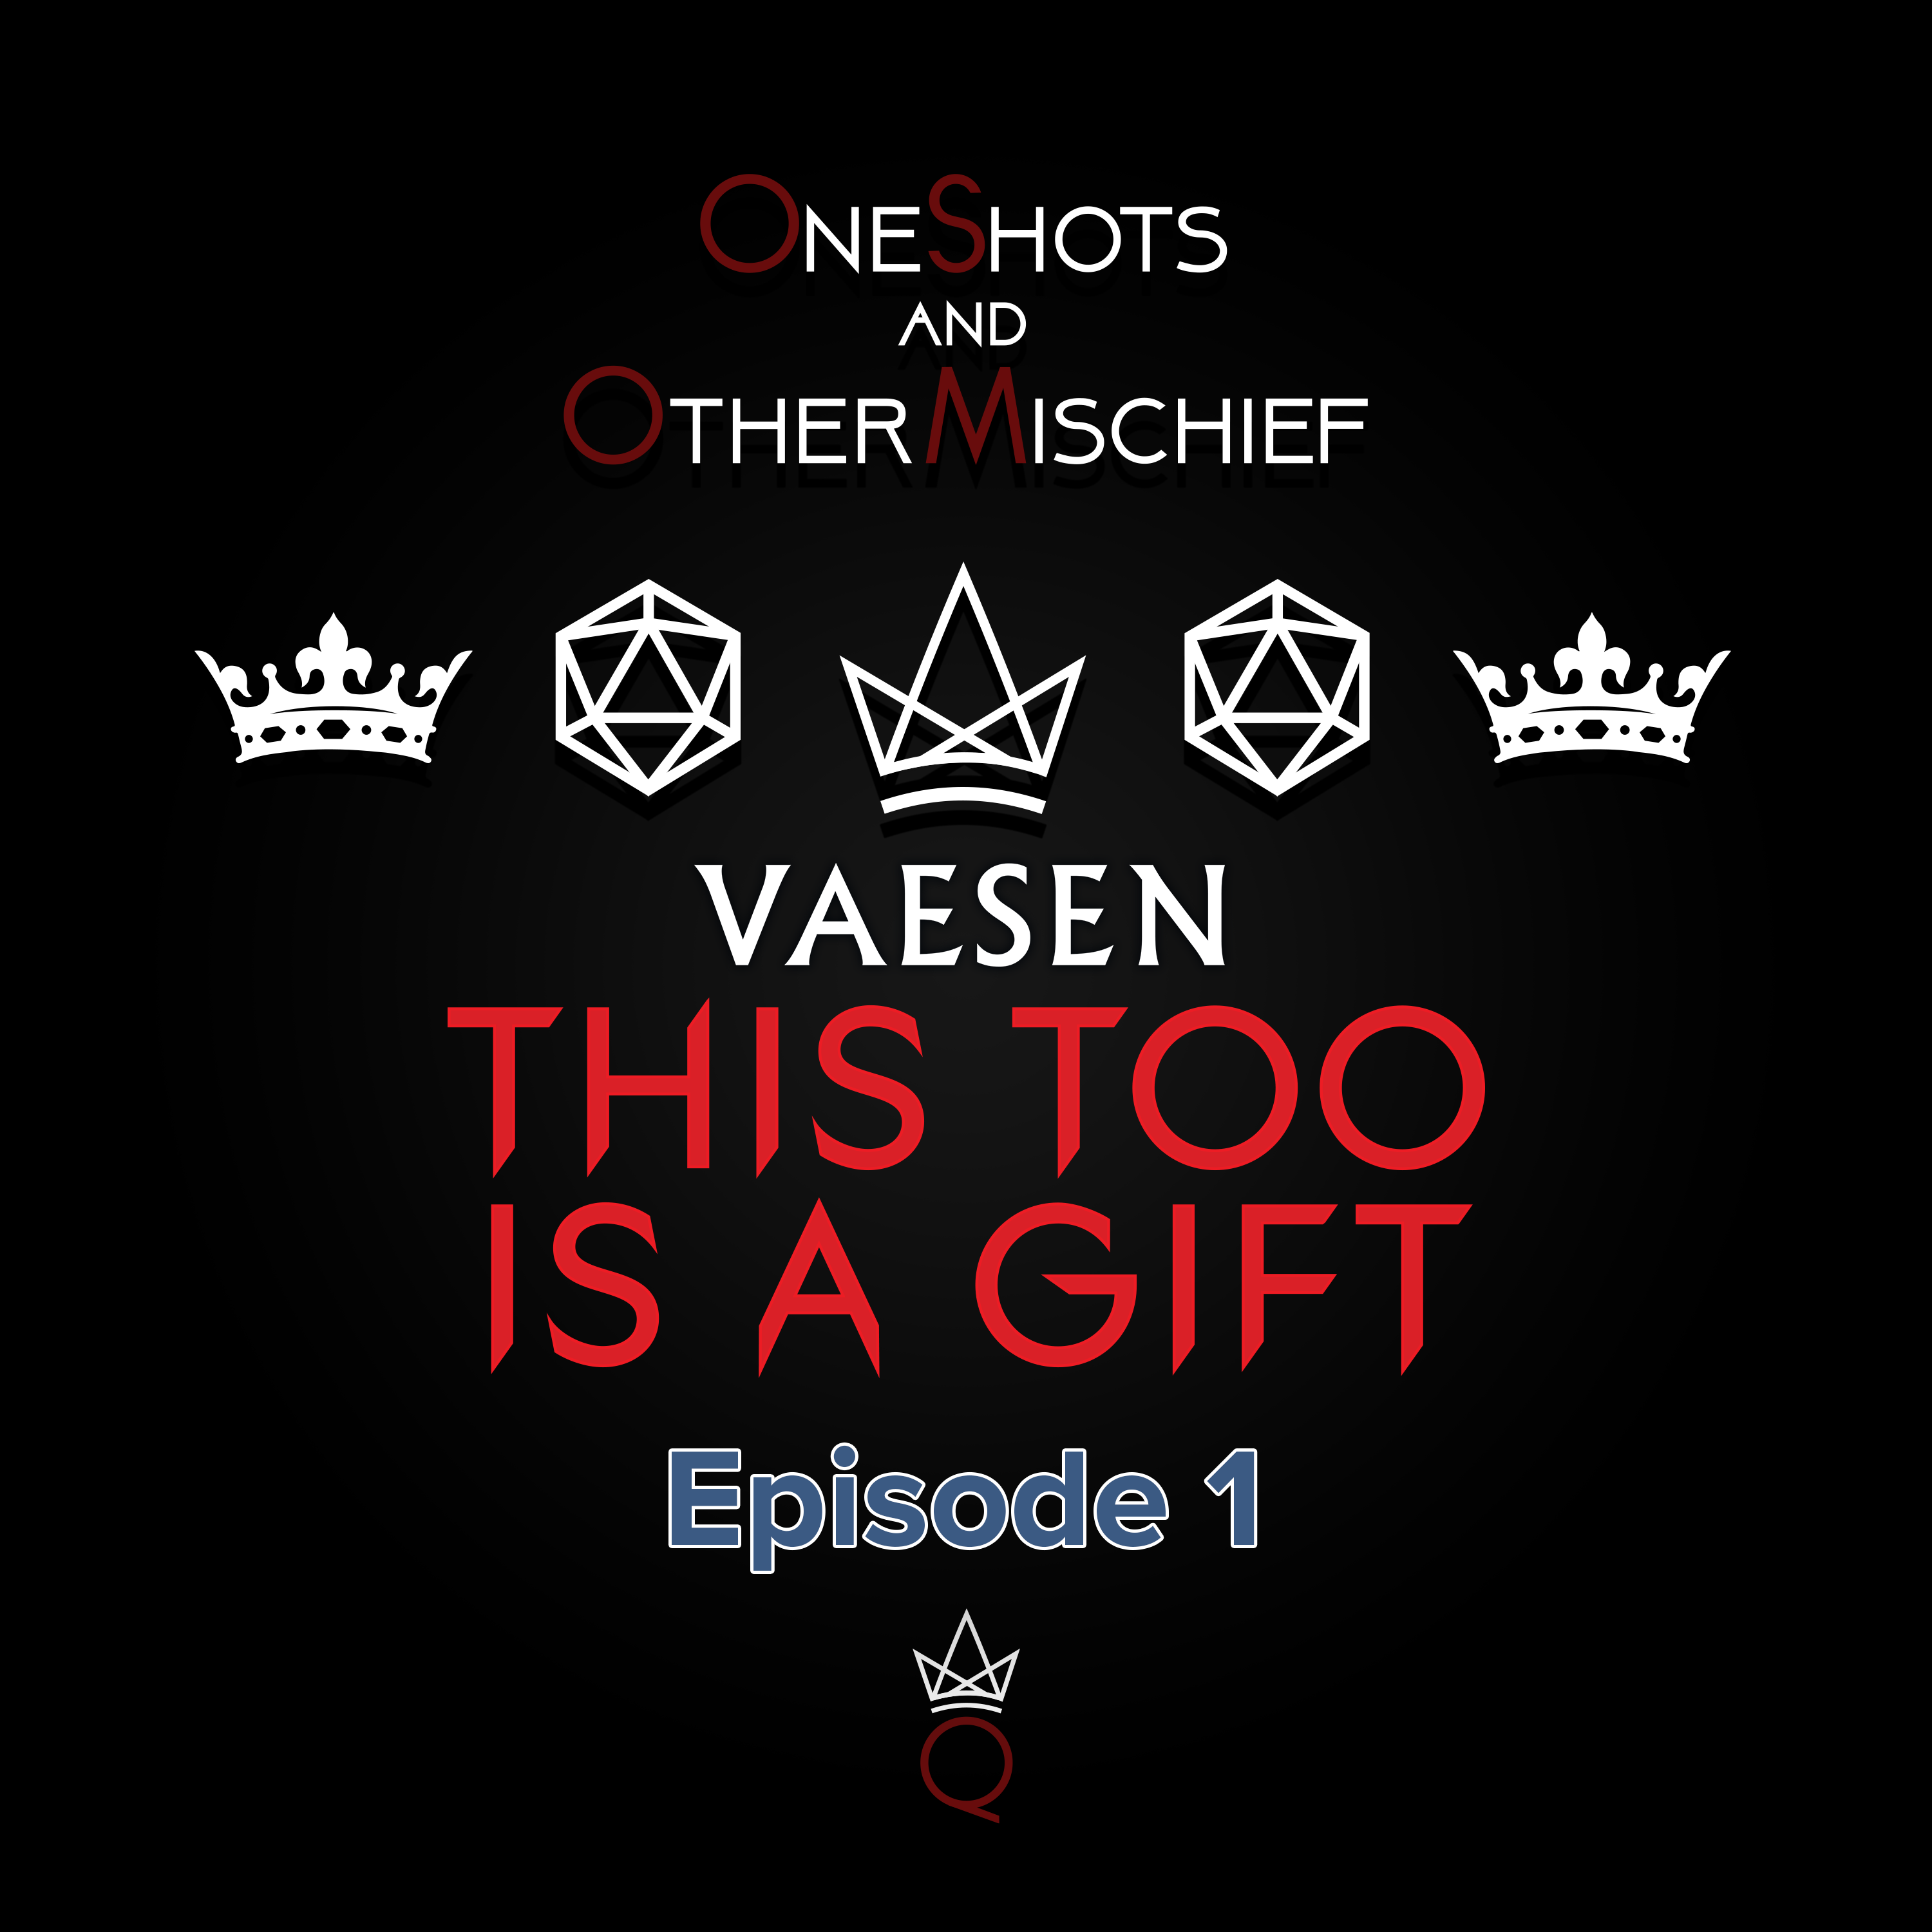 Vaesen - This Too is a Gift, Episode 1